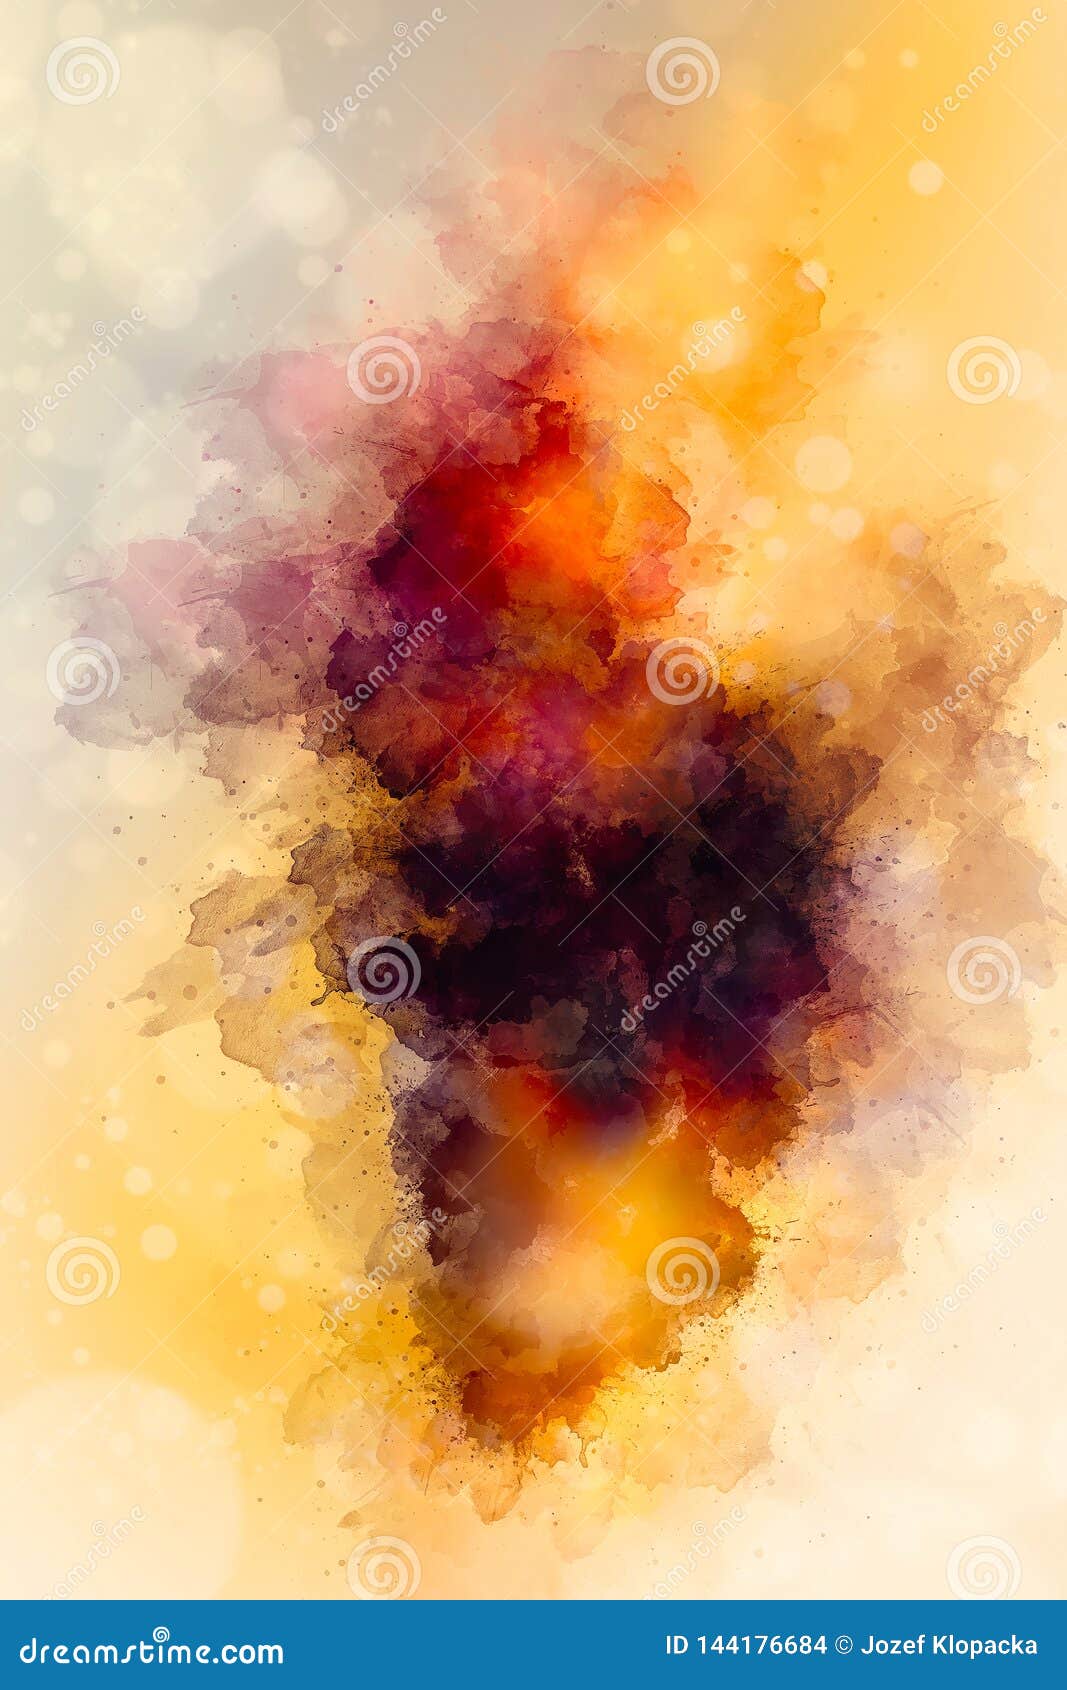 abstract color splashes on ocre background.